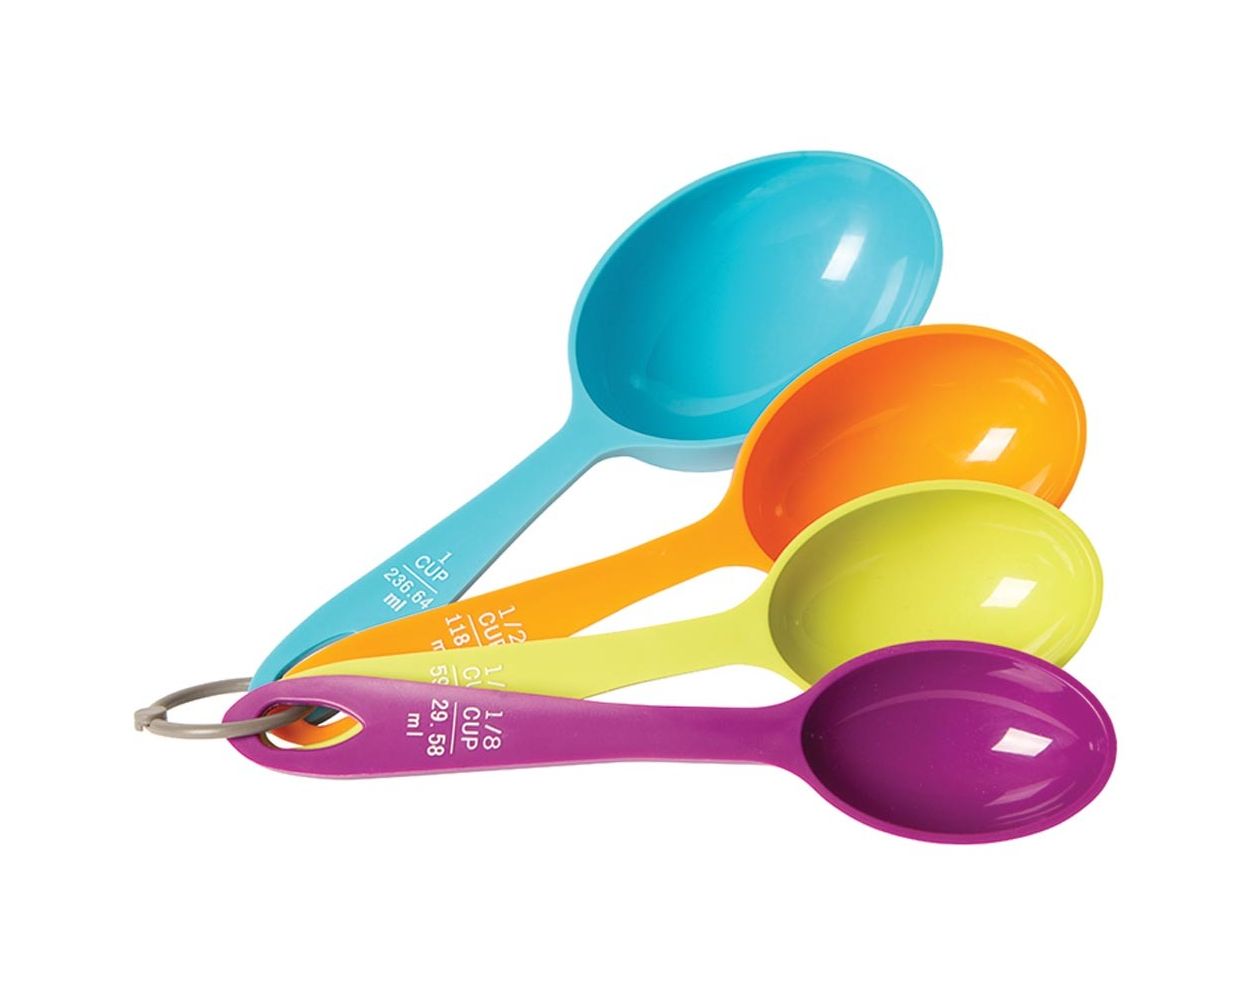 Colorful Measuring Cups, set of 4, plastic from American Heritage